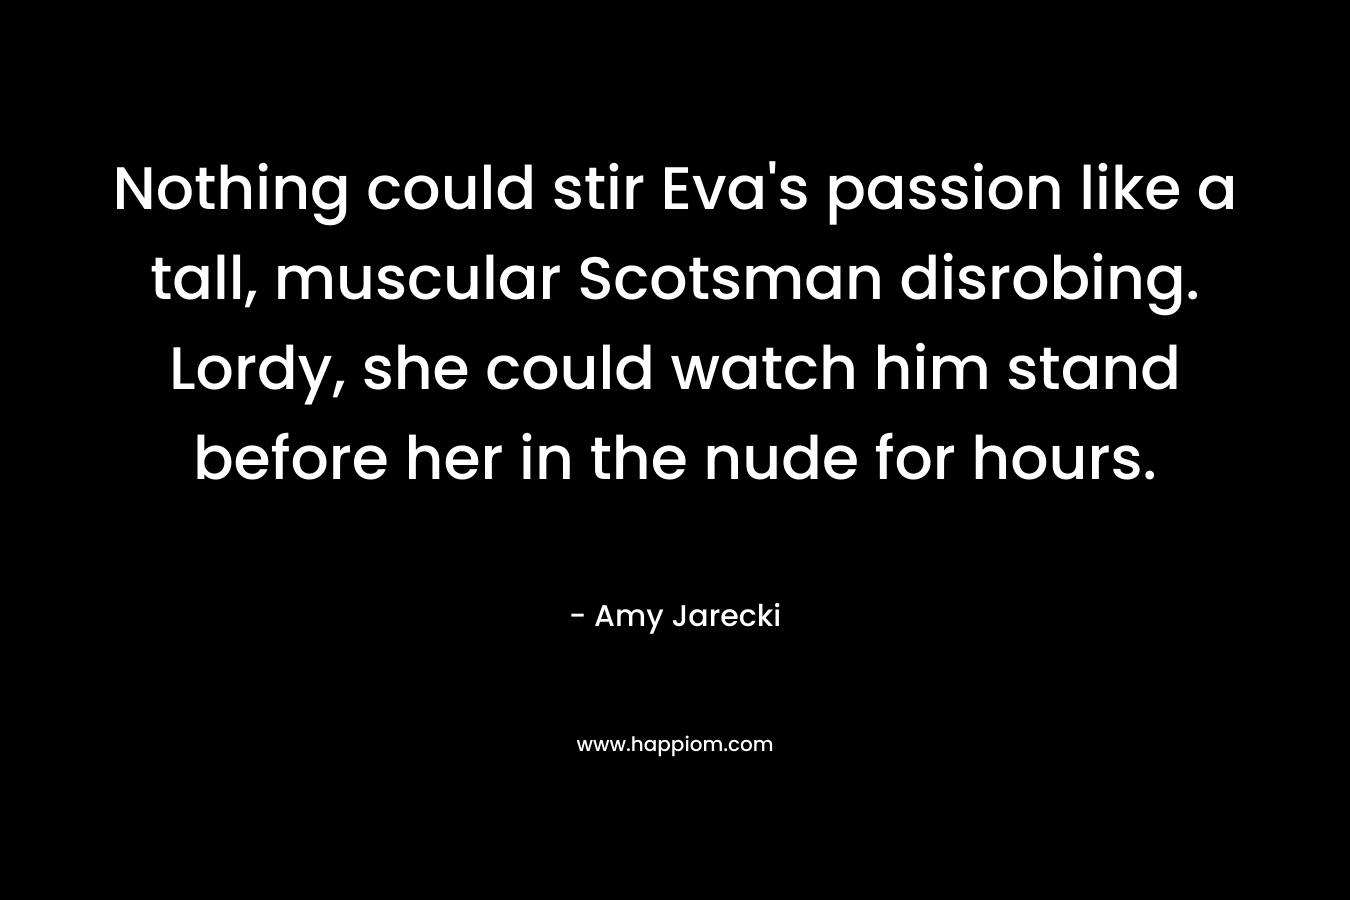 Nothing could stir Eva's passion like a tall, muscular Scotsman disrobing. Lordy, she could watch him stand before her in the nude for hours.